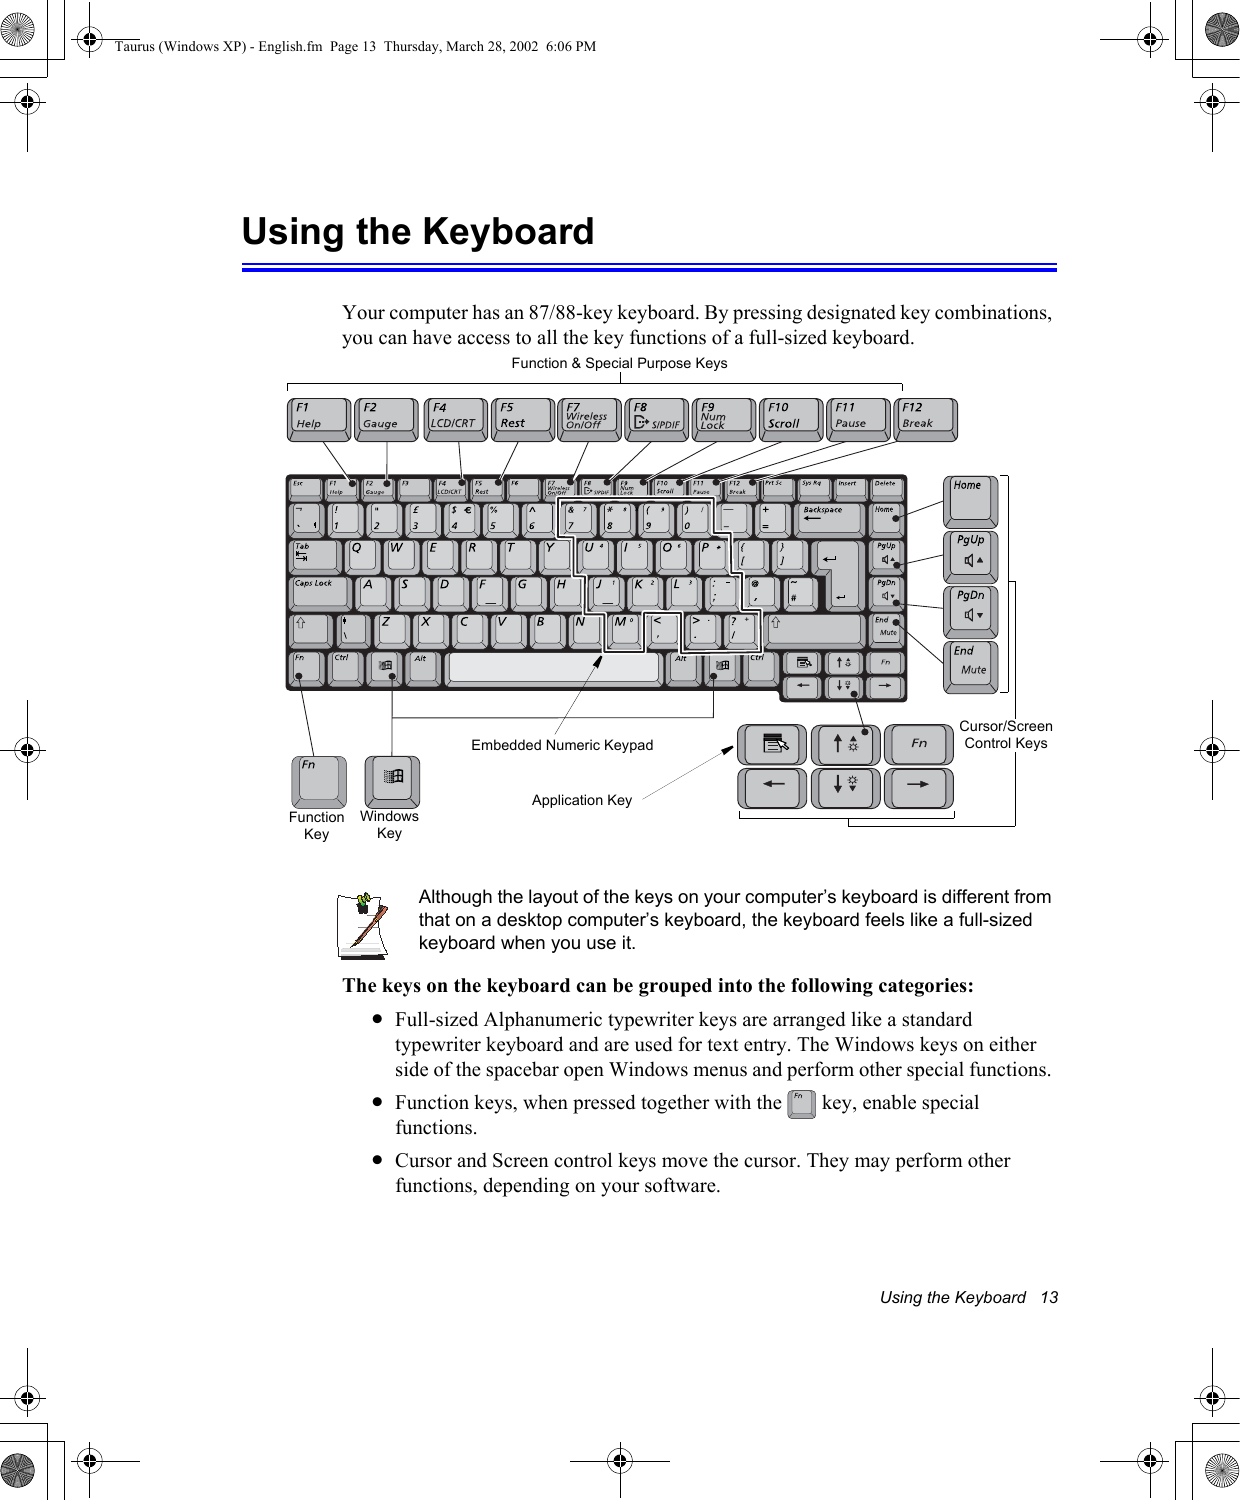 Using the Keyboard   13Using the KeyboardYour computer has an 87/88-key keyboard. By pressing designated key combinations, you can have access to all the key functions of a full-sized keyboard. Although the layout of the keys on your computer’s keyboard is different from that on a desktop computer’s keyboard, the keyboard feels like a full-sized keyboard when you use it. The keys on the keyboard can be grouped into the following categories:•Full-sized Alphanumeric typewriter keys are arranged like a standard typewriter keyboard and are used for text entry. The Windows keys on either side of the spacebar open Windows menus and perform other special functions. •Function keys, when pressed together with the   key, enable special functions.•Cursor and Screen control keys move the cursor. They may perform other functions, depending on your software.Function &amp; Special Purpose KeysEmbedded Numeric KeypadApplication KeyCursor/Screen Control KeysWindows KeyFunction KeyTaurus (Windows XP) - English.fm  Page 13  Thursday, March 28, 2002  6:06 PM